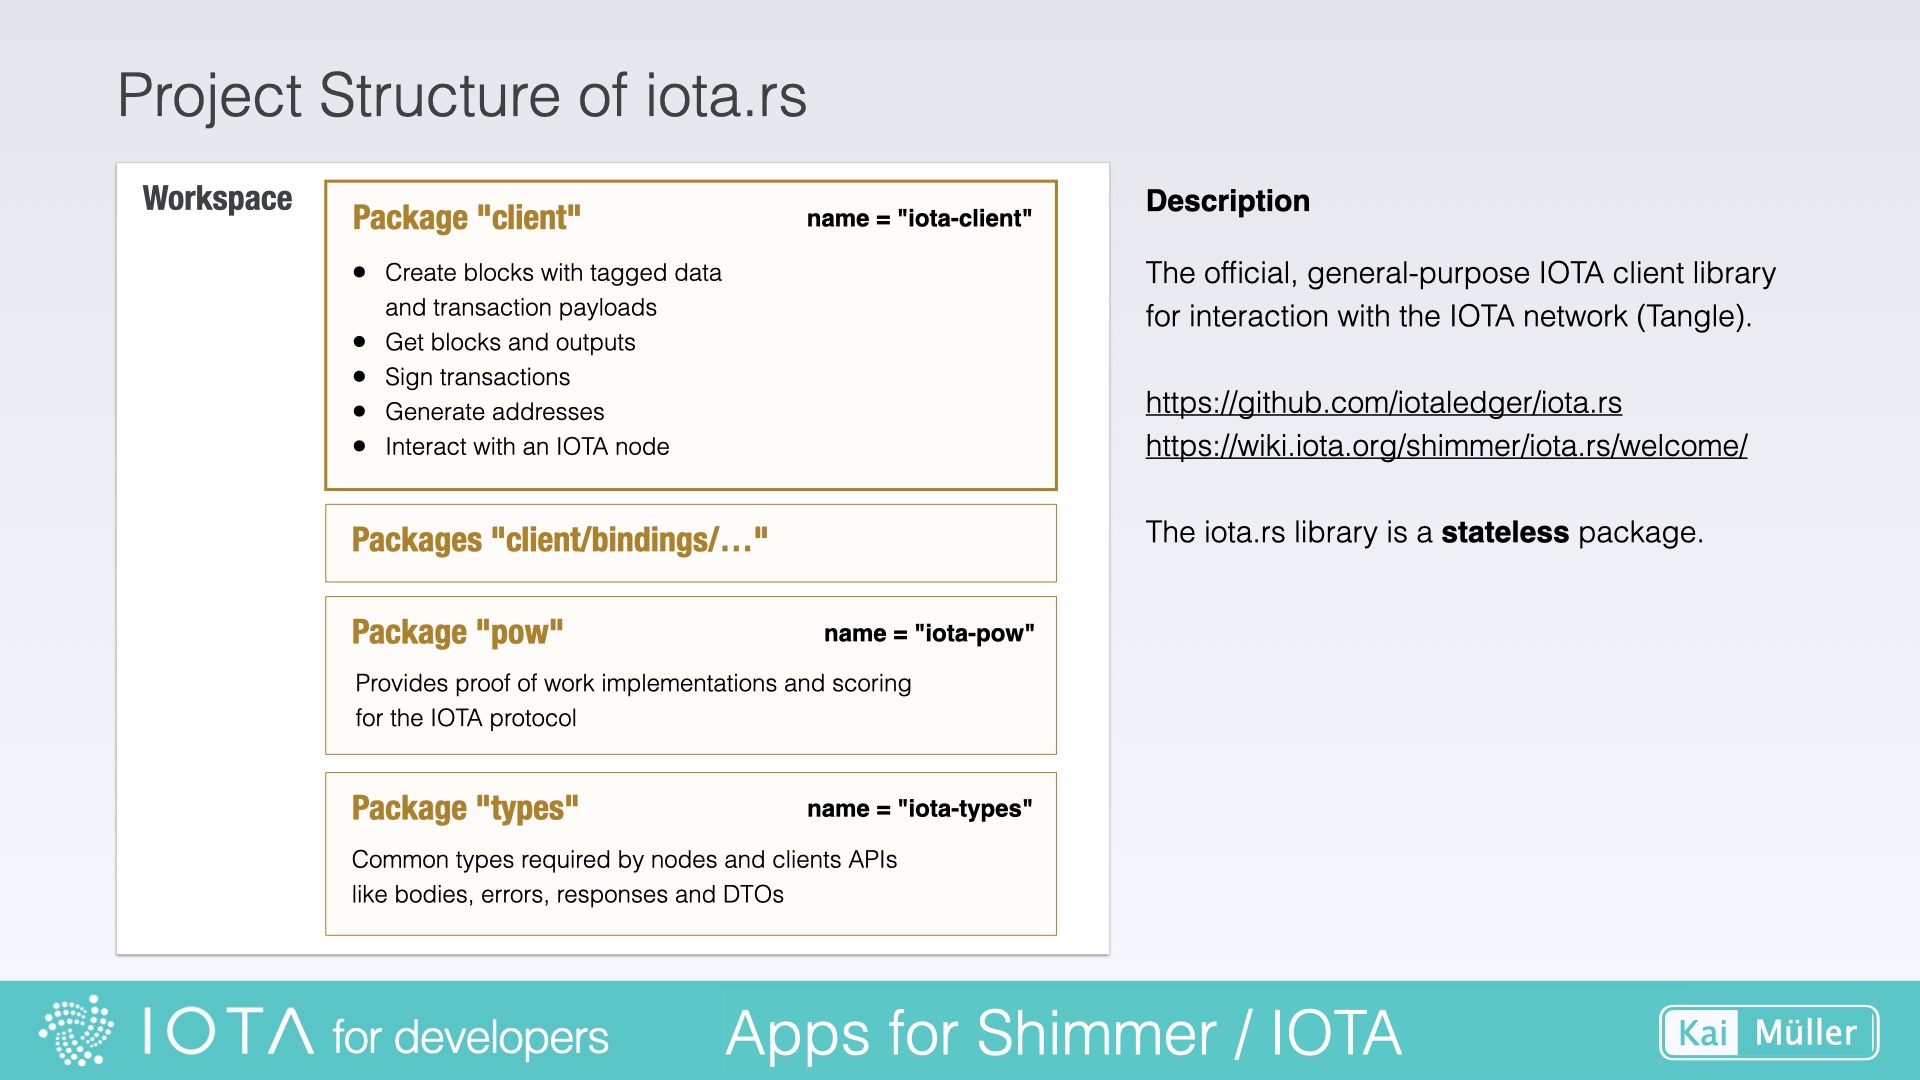 Project Structure of iota.rs